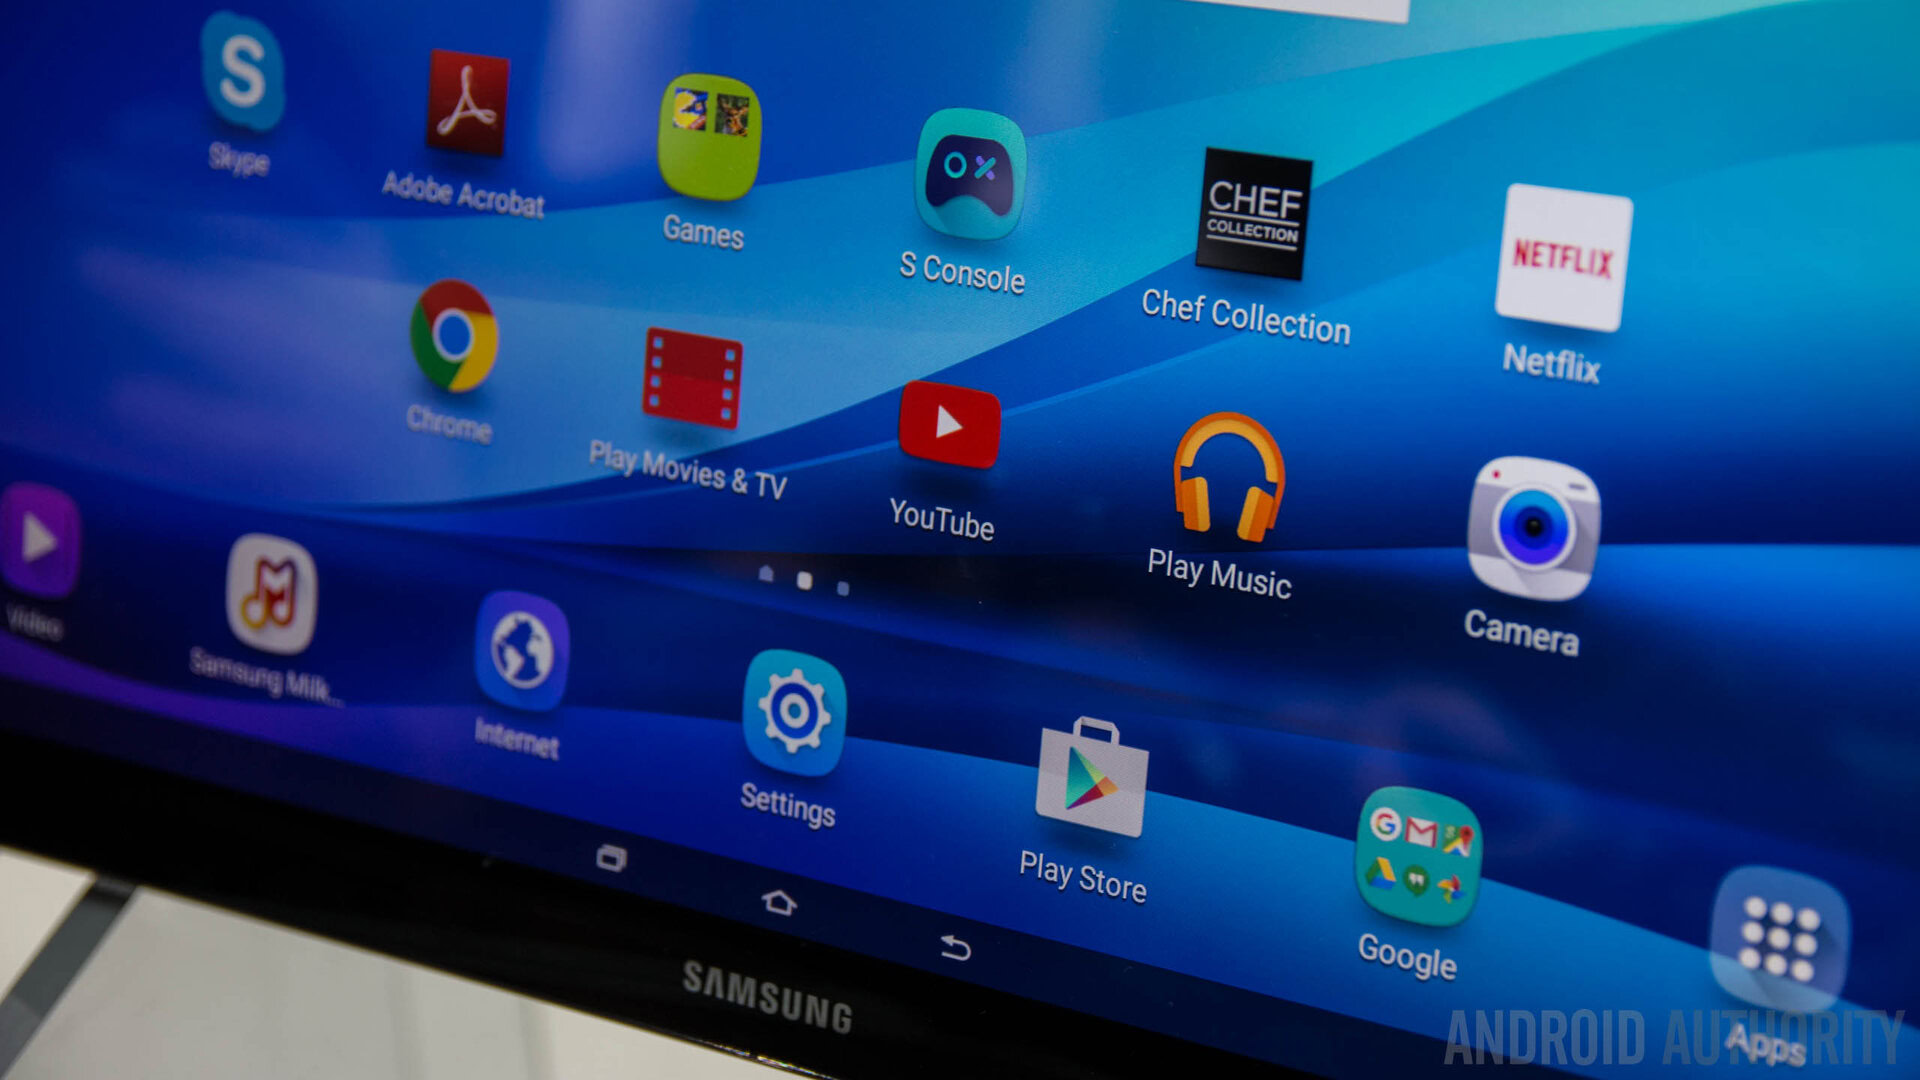 Renders suggest Samsung Galaxy View 2 tablet is real, headed to AT&T